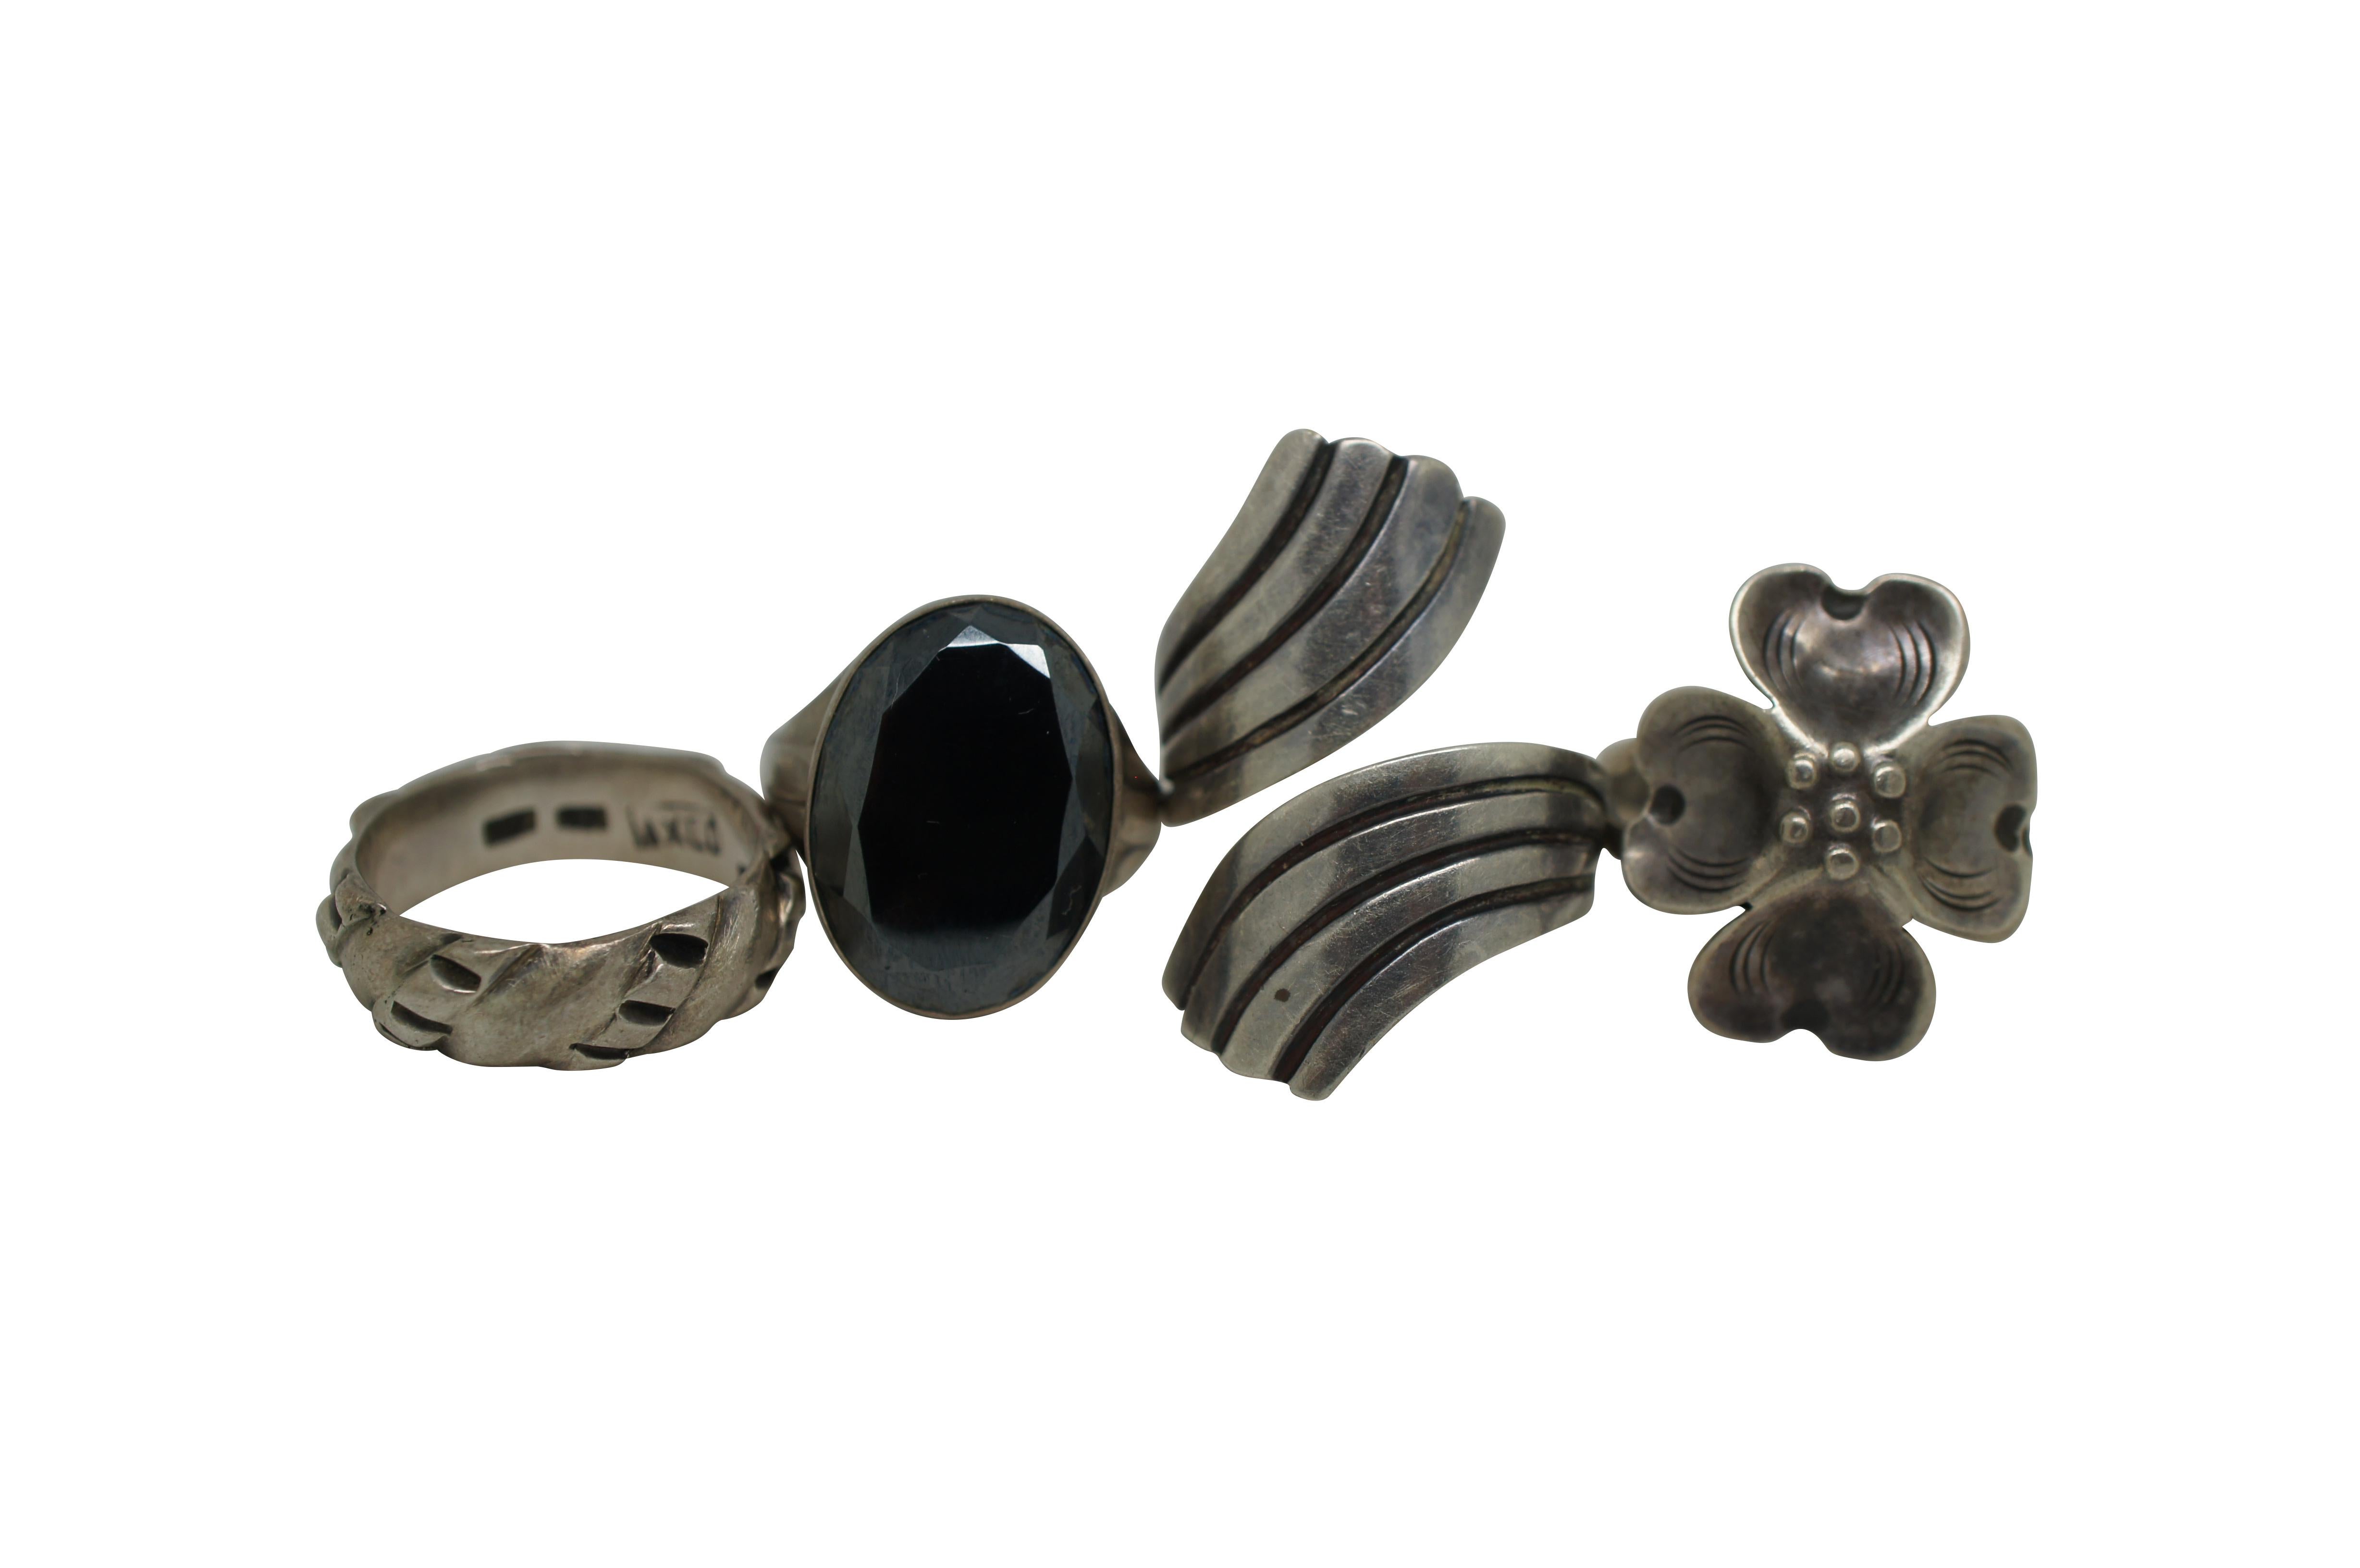 Lot of 7 vintage rings in assorted styles and sizes, four sterling silver and three other base metal. Lot includes: adjustable wave shaped, marked EBS, Taxco Hecho en Mexico; Sterling with art deco fan sides and black oval rhinestone; adjustable